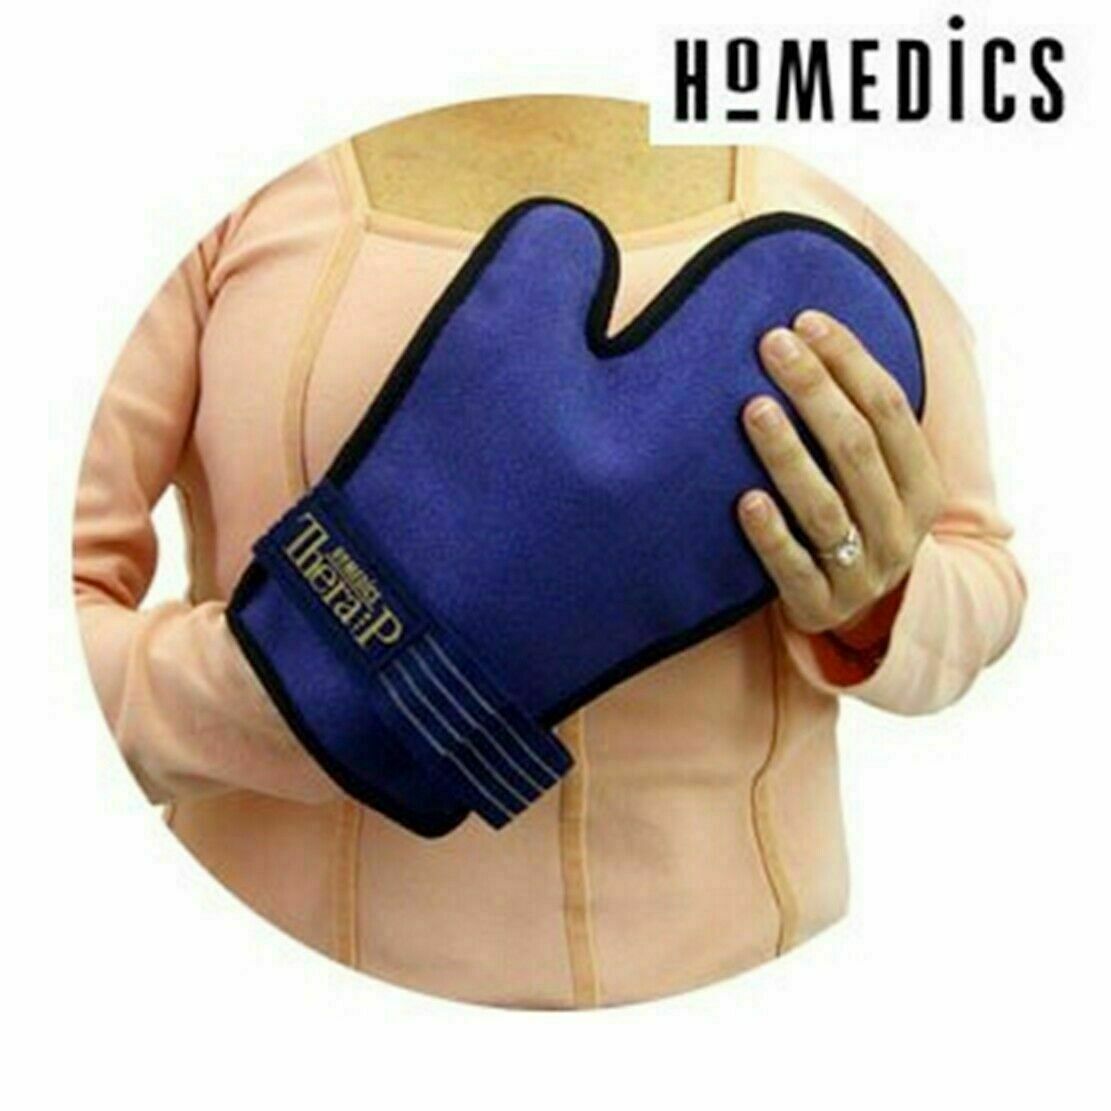 NEW HOMEDICS THERA P MAGNETIC THERAPY ARTHRITIS MITT MAGNETIC WAVE 20 MAGNETS!